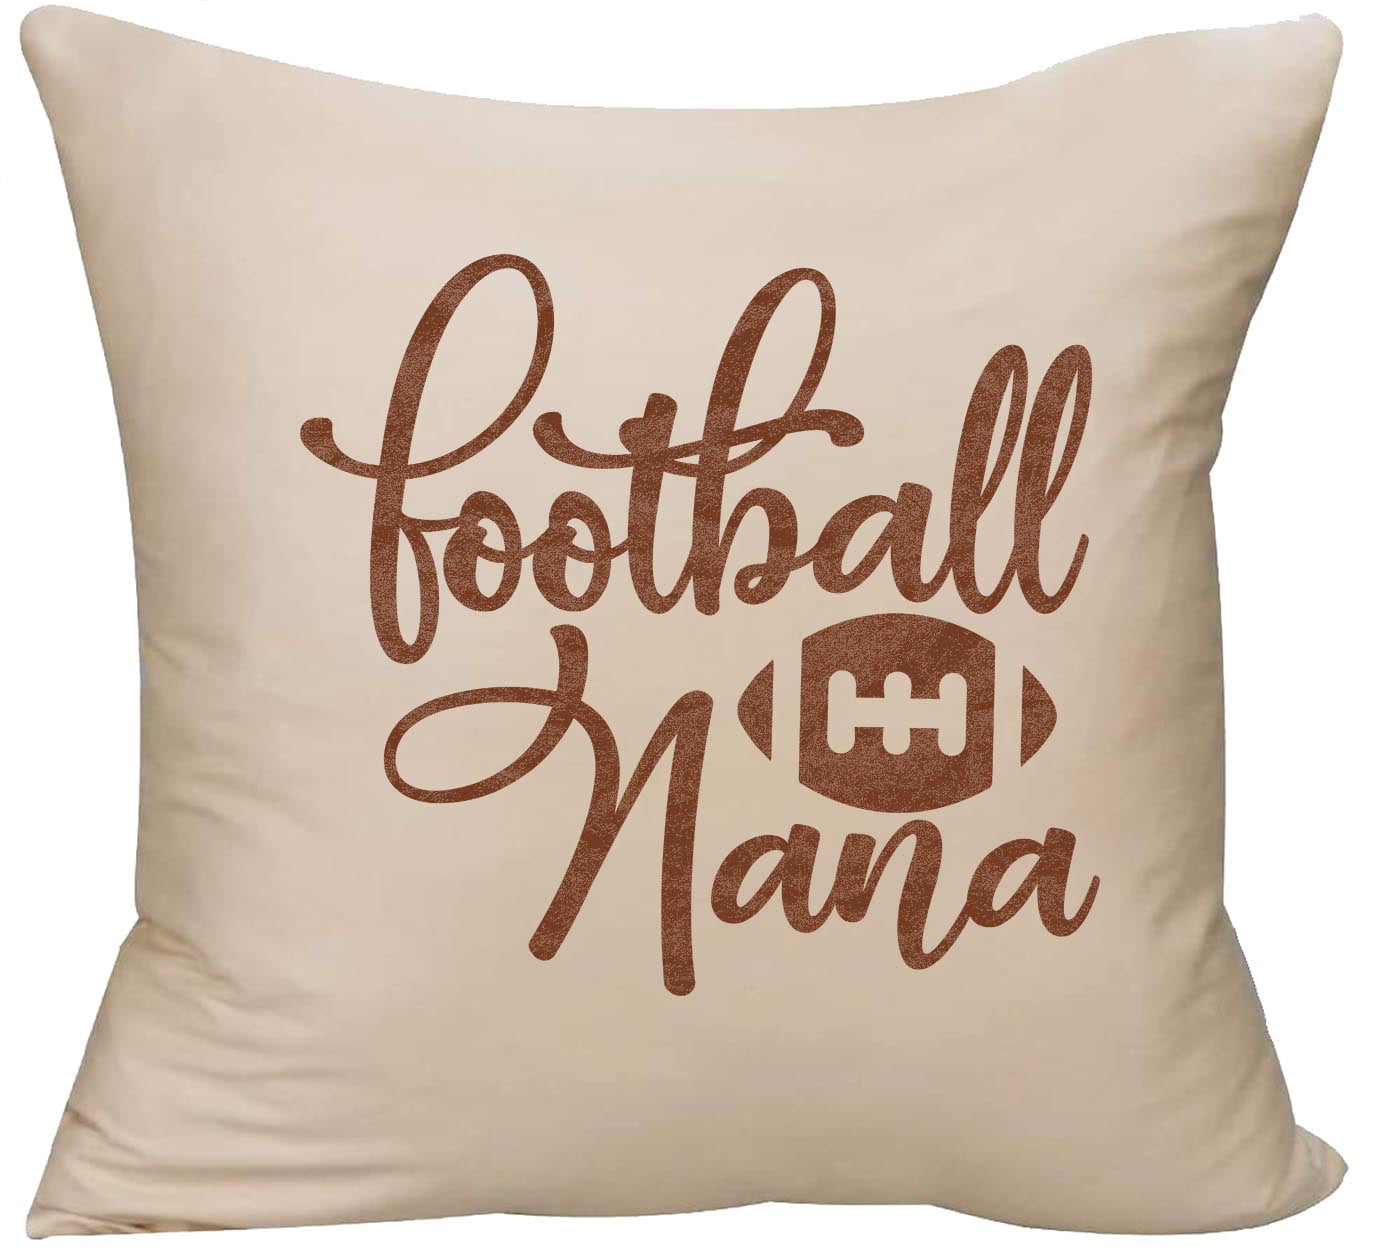 Nana Heart of Gold Decorative Tapestry Toss Pillow Made in the USA SKU P80-963